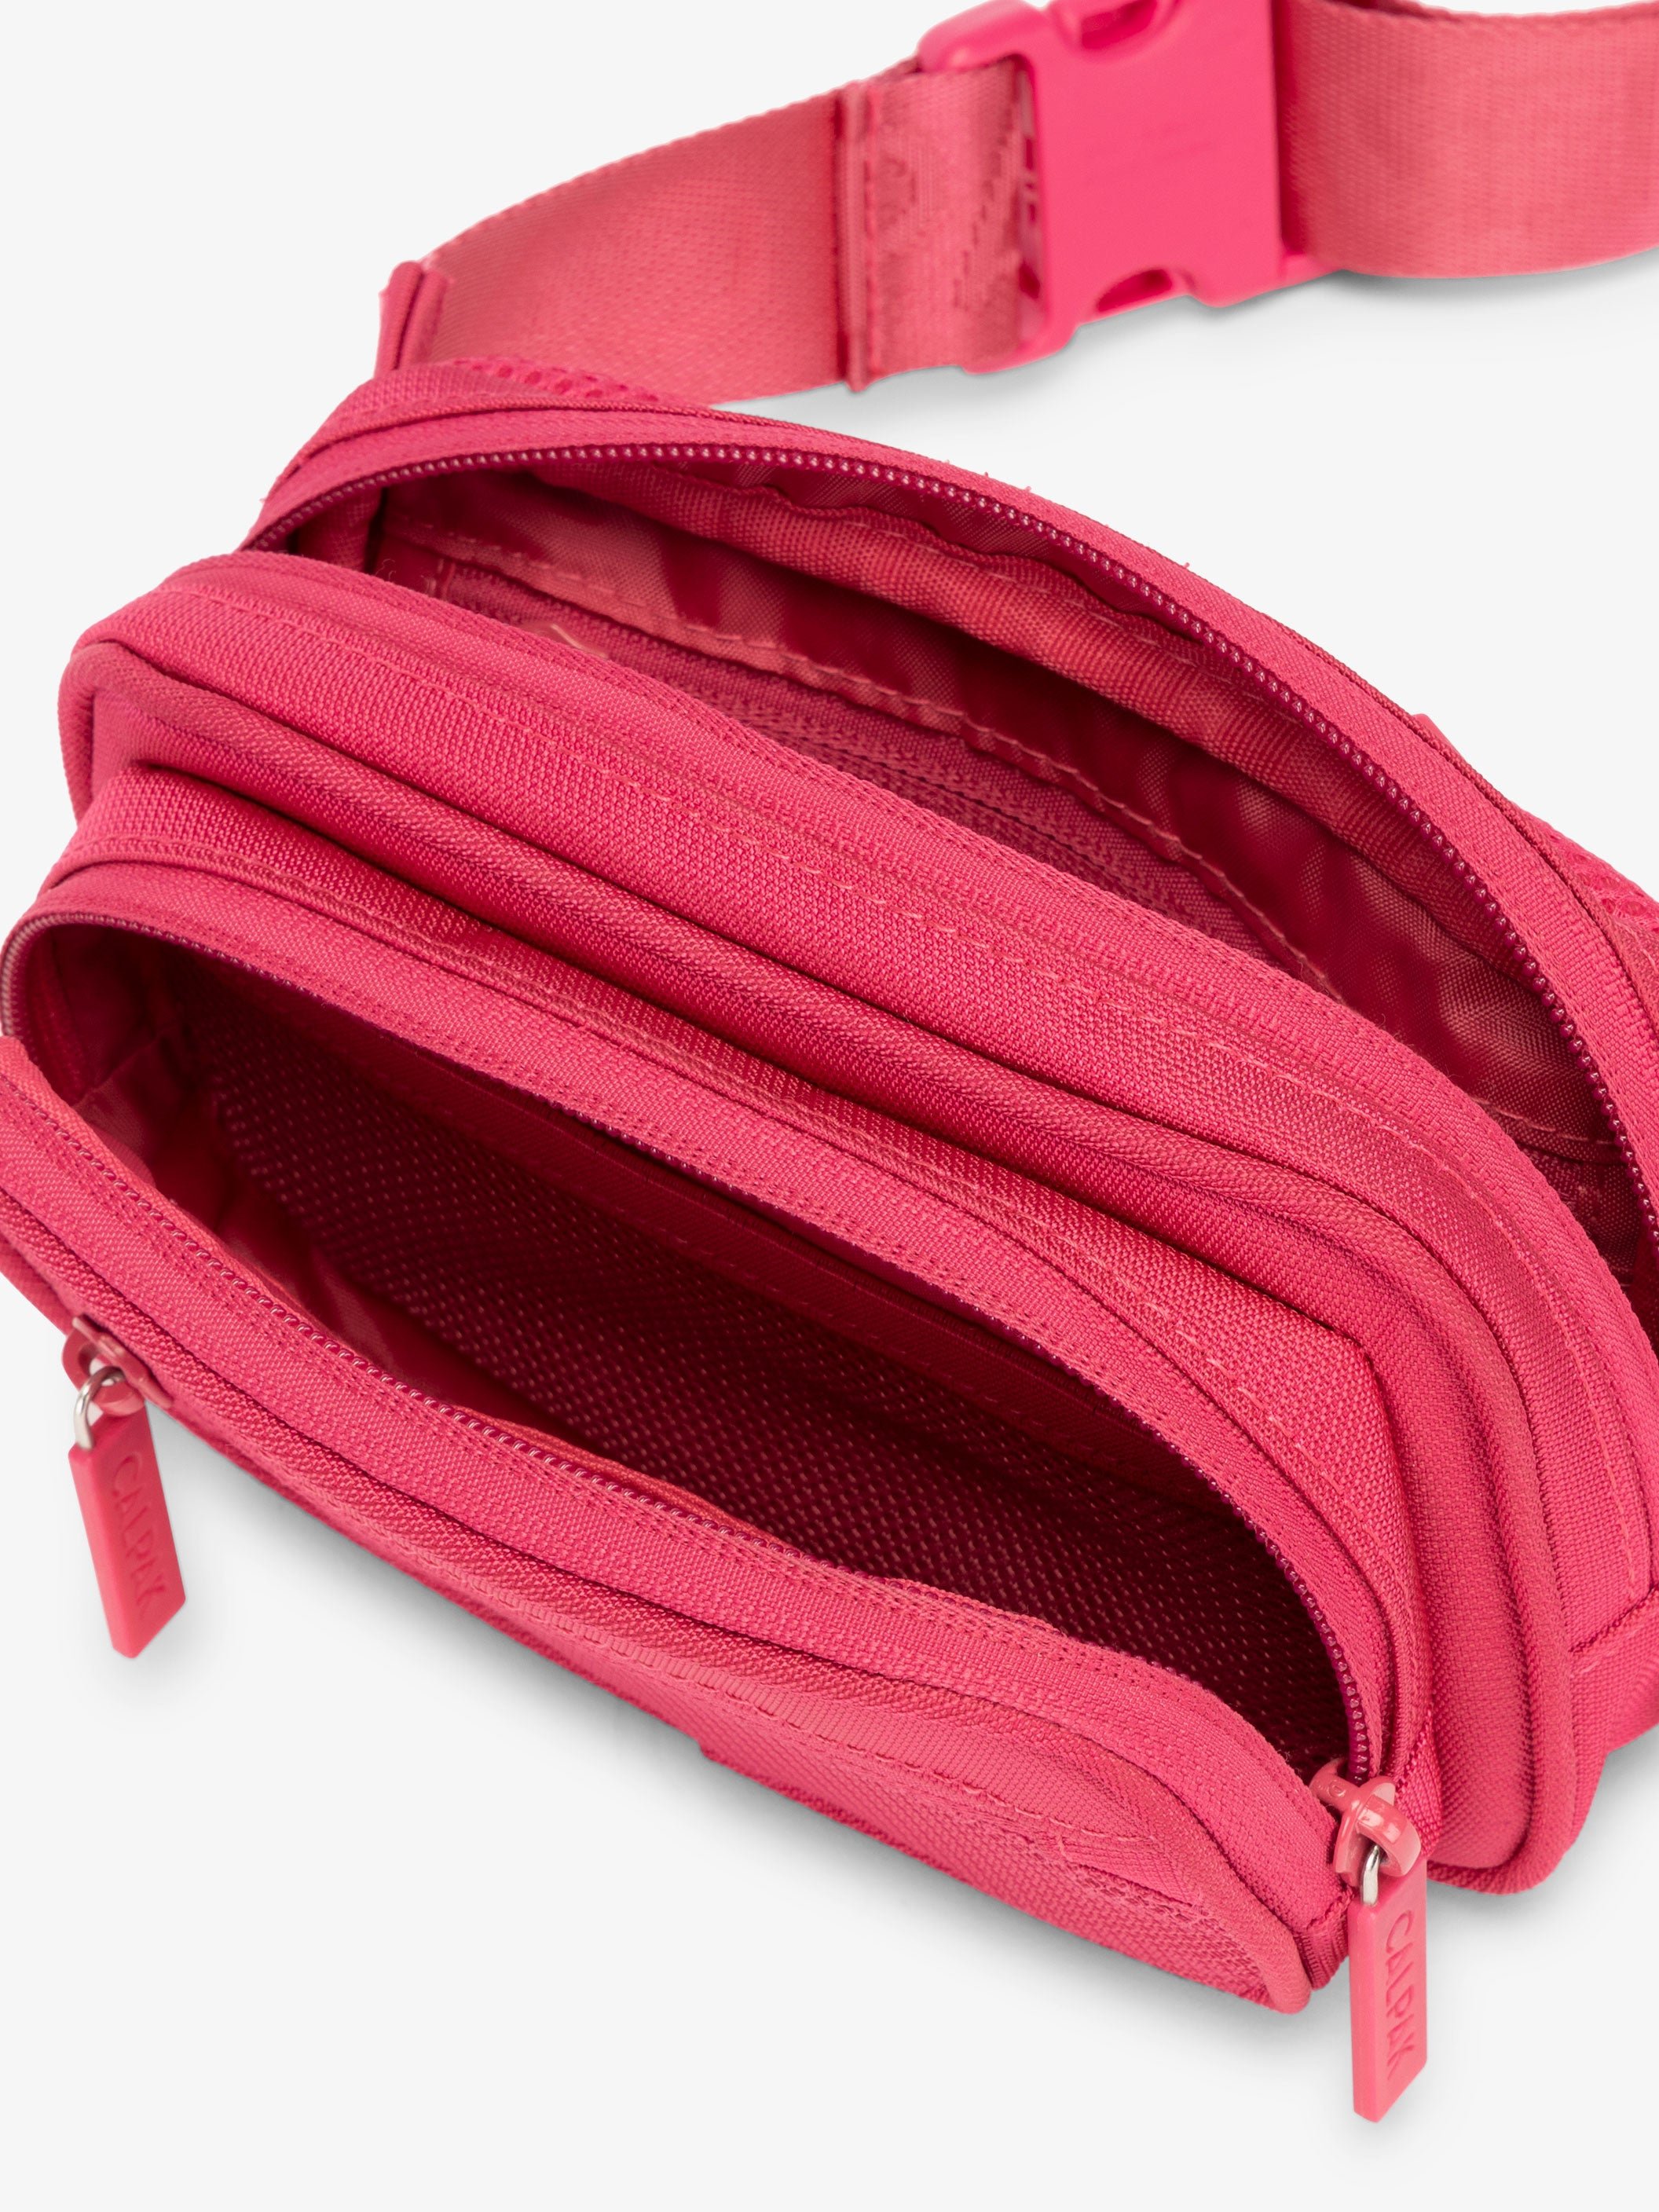 RFID CALPAK fanny pack with front zippered pocket, multiple interior and exterior pockets in pink dragonfruit